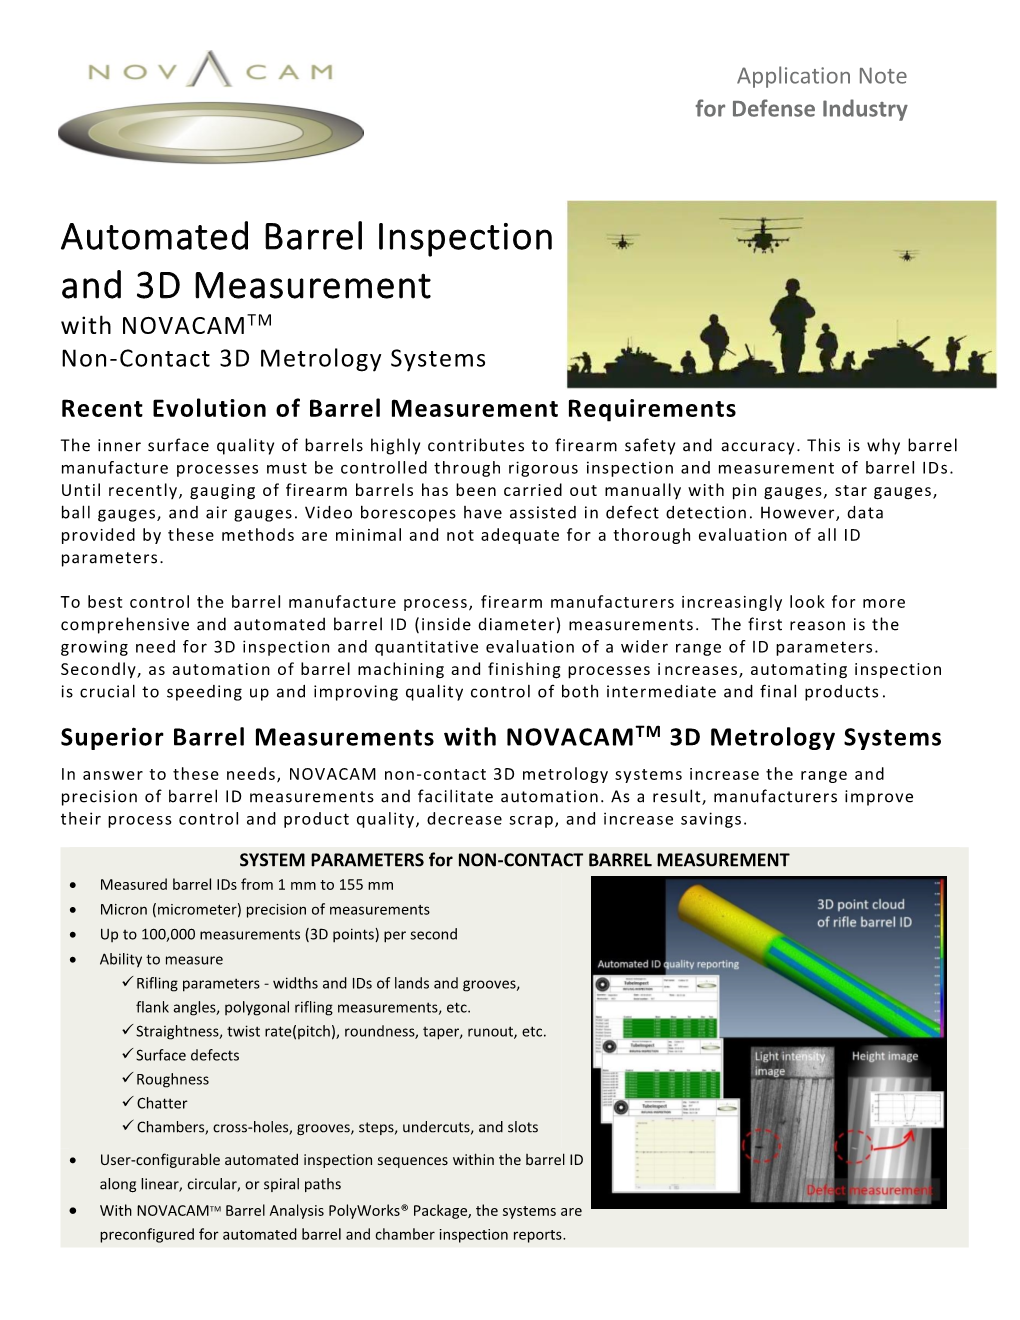 Automated Barrel Inspection and 3D Measurement